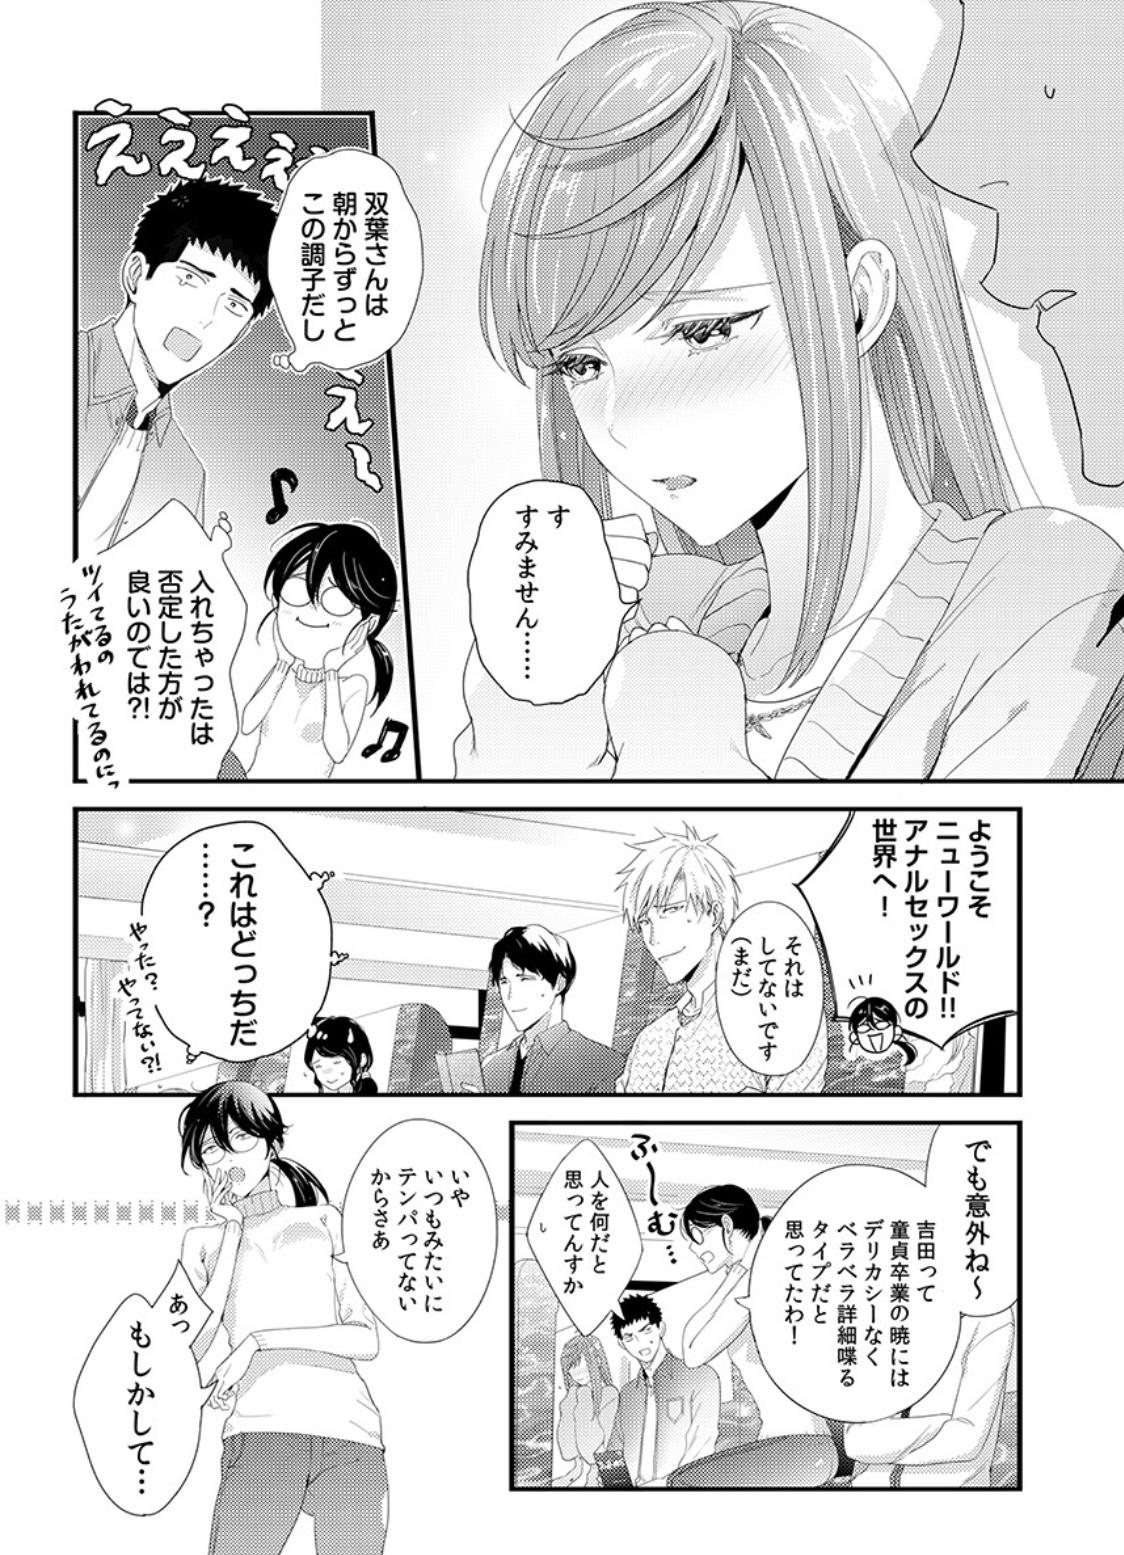 Please Let Me Hold You Futaba-San! Ch. 1-4 30